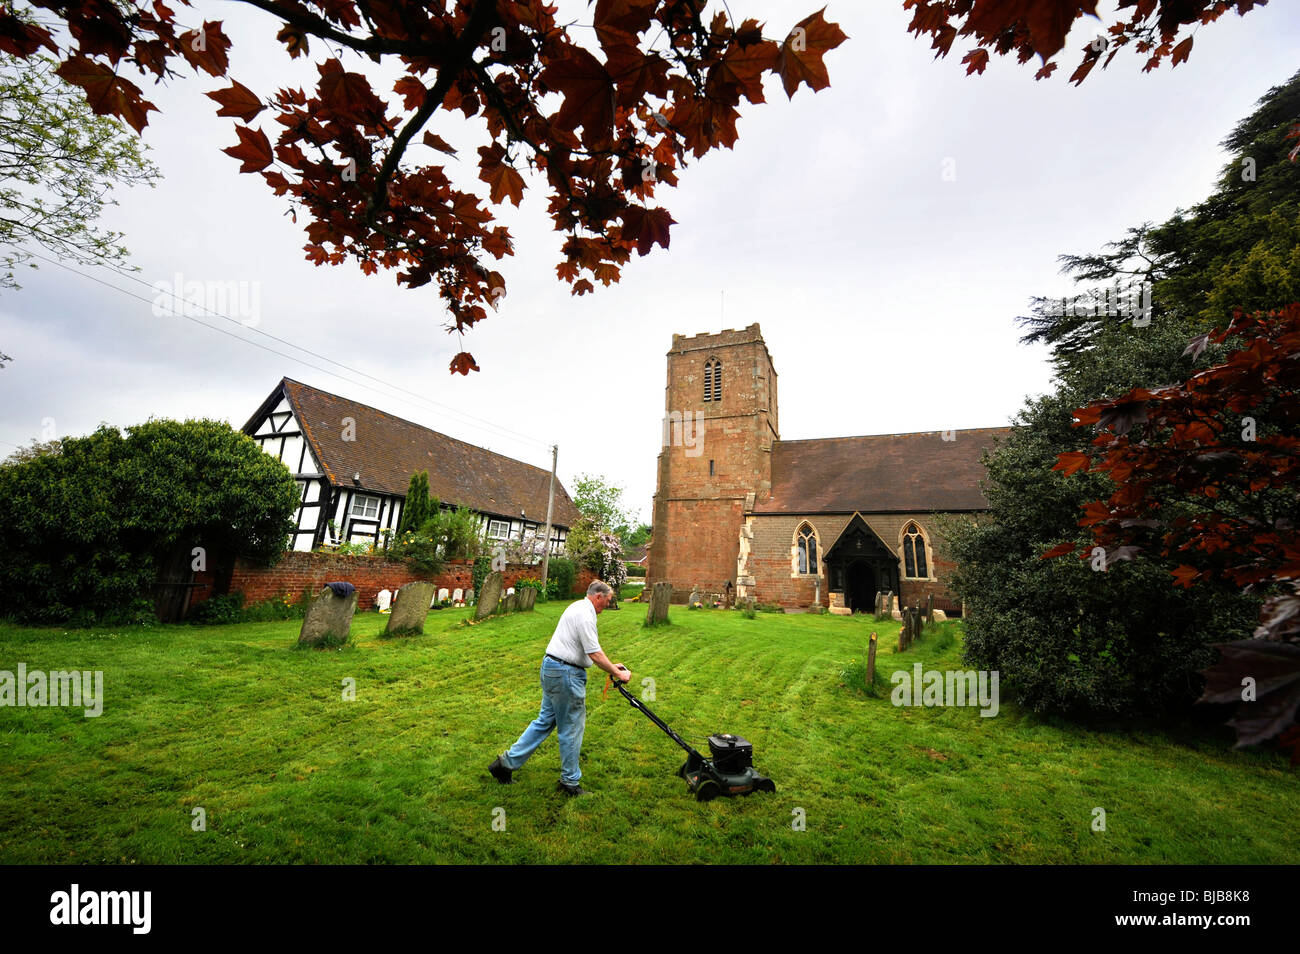 A man mows the grass in the graveyard at The Church of St Bartholomew's in the village of Redmarley D'Abitot, Gloucestershire Stock Photo